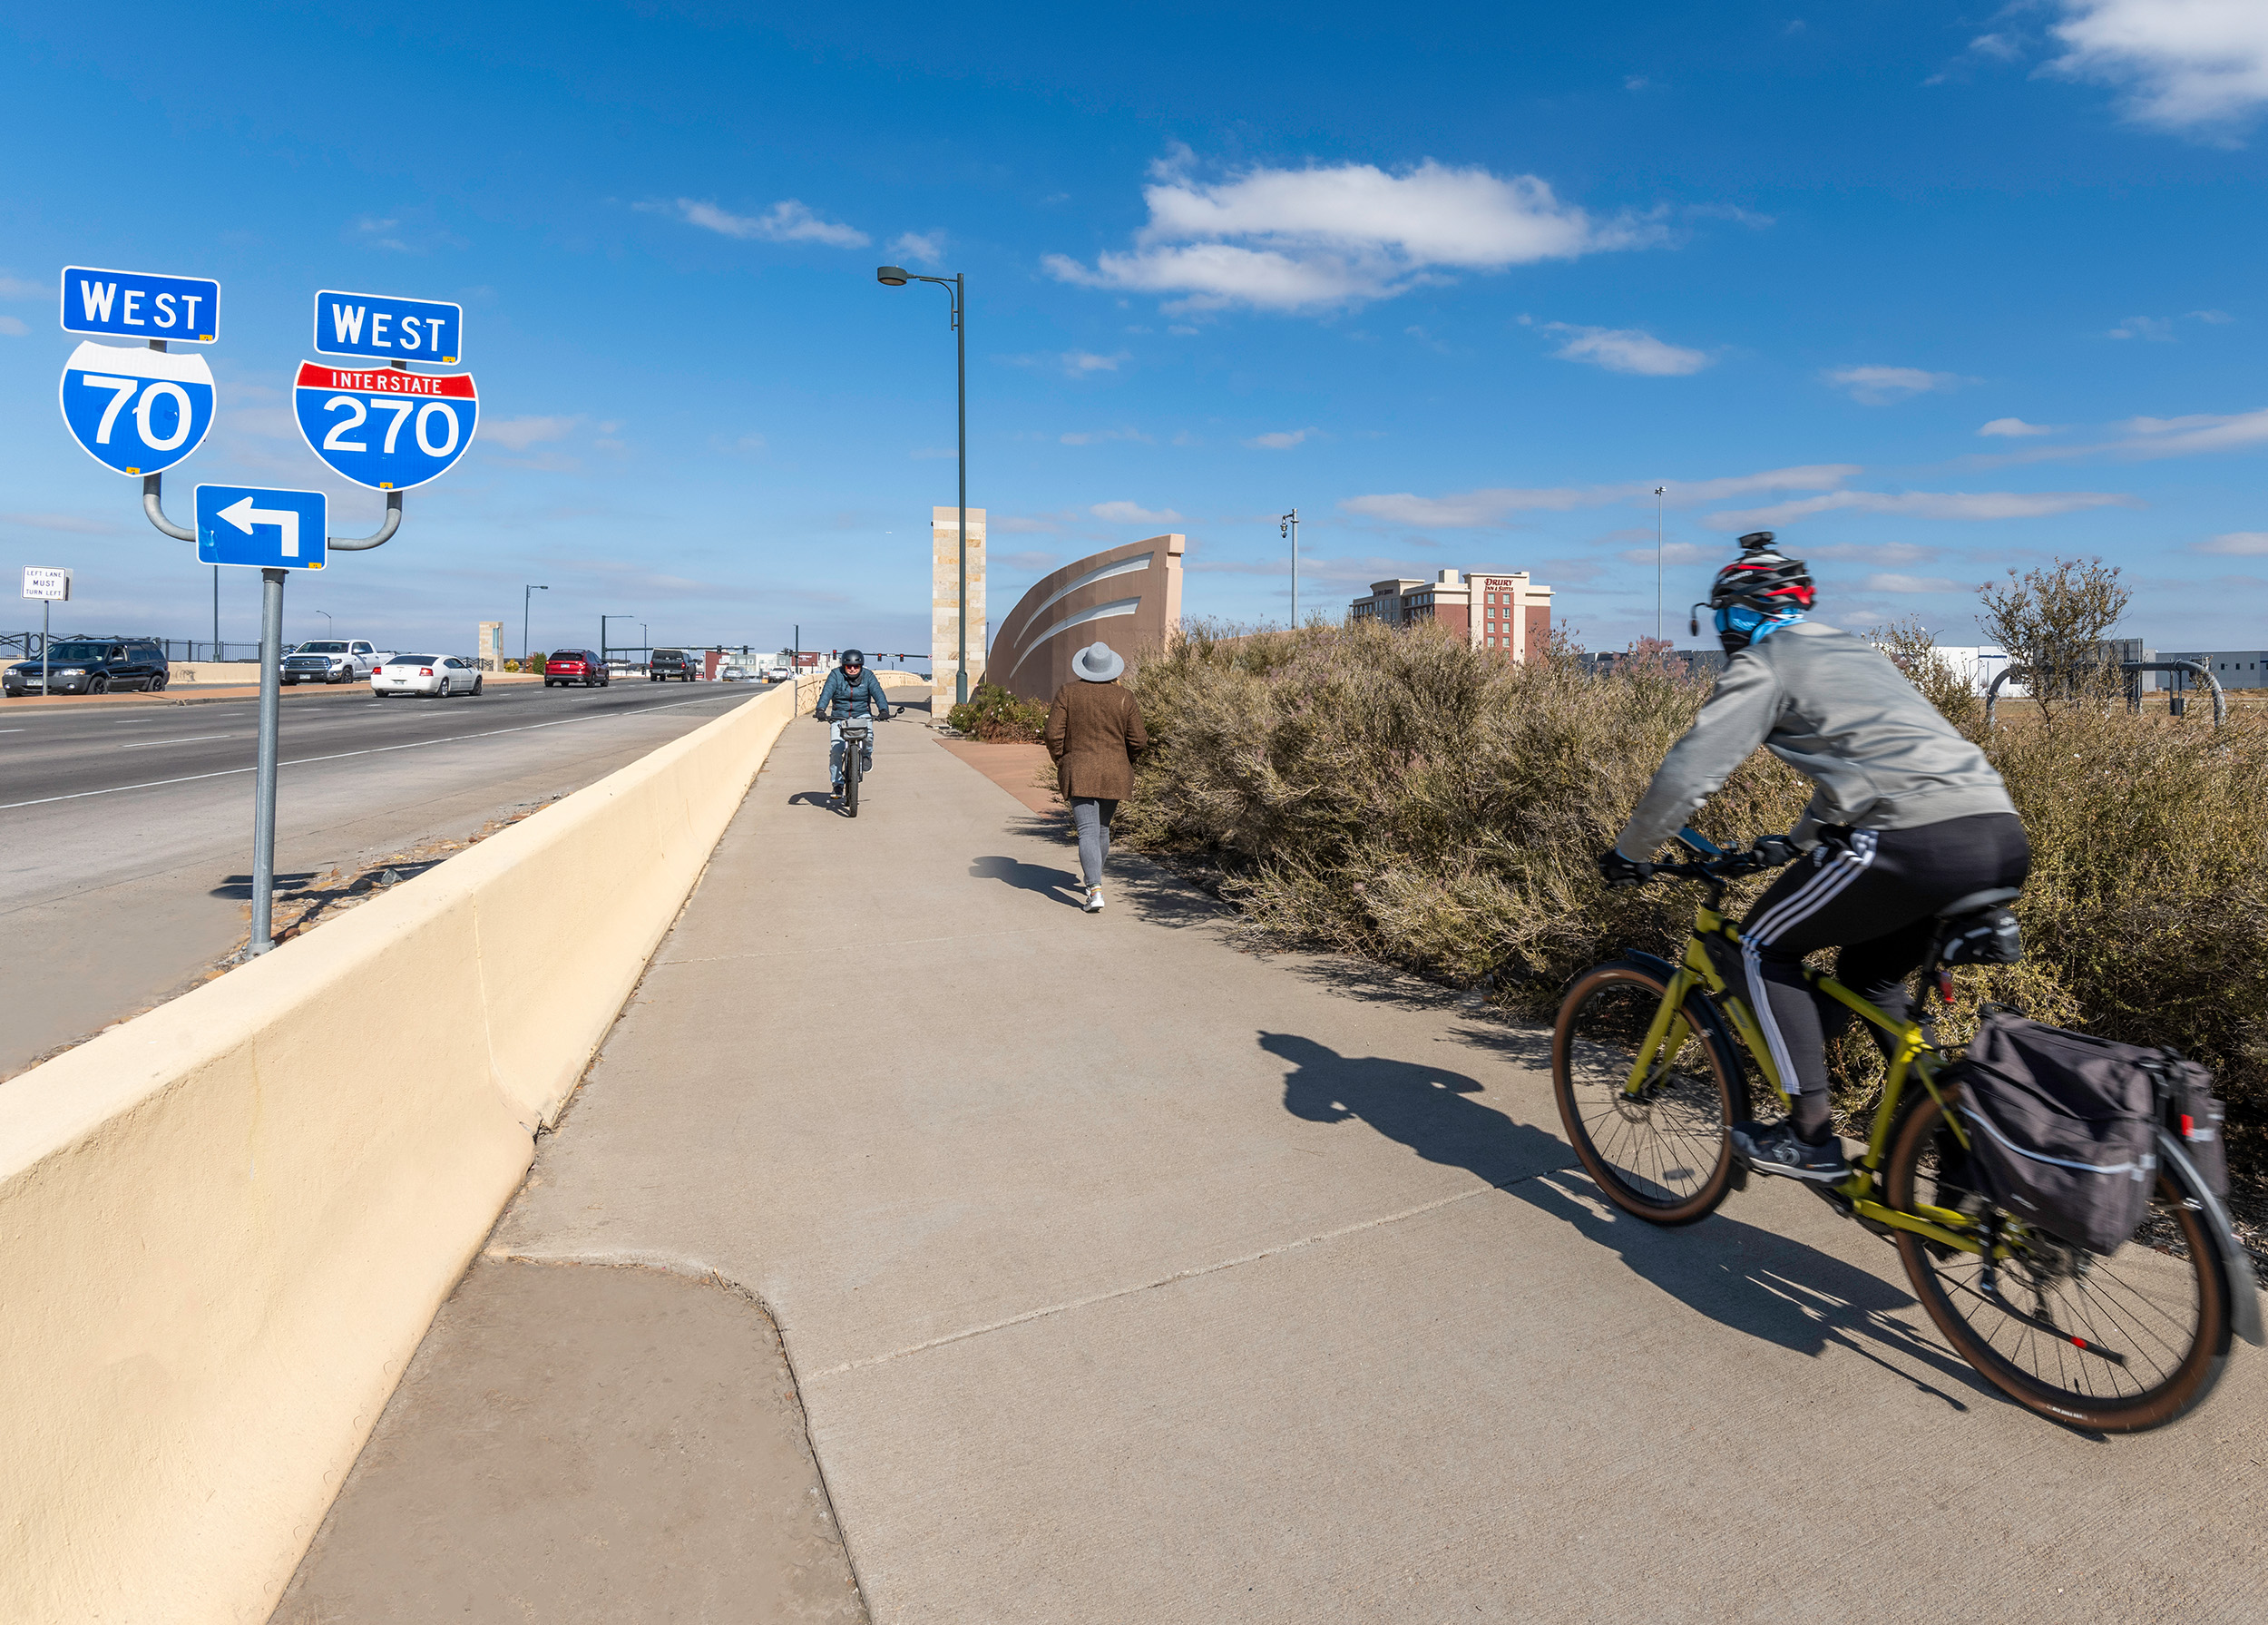 The Central Park Boulevard Bridge serves as the gateway to Denver for those traveling from the east and the Denver International Airport.